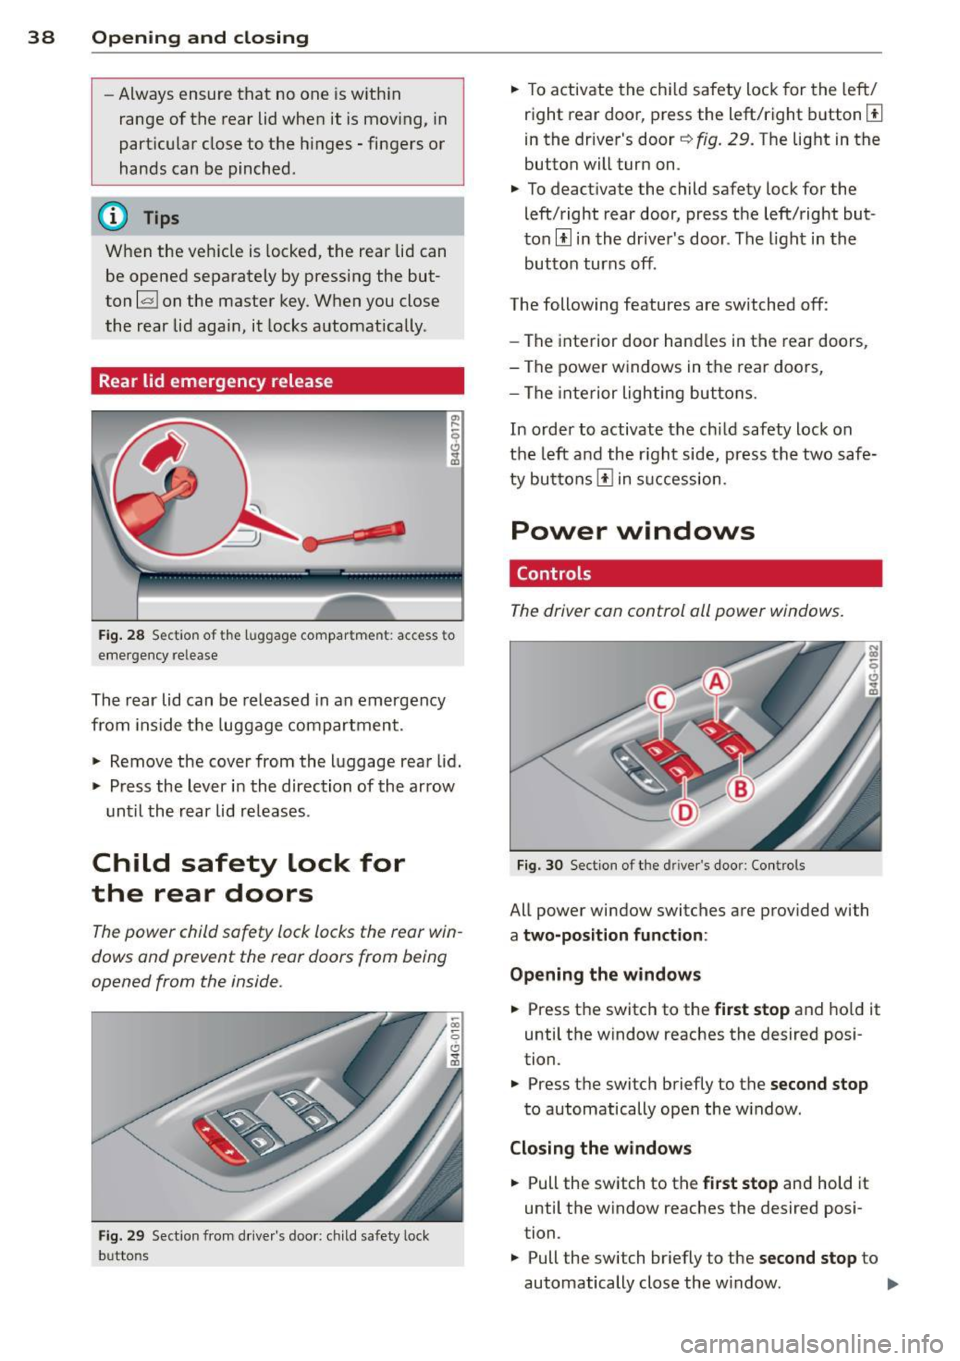 AUDI A6 2013 Owners Guide 38  Opening  and closing 
- Always  ensure  that  no  one  is within 
range  of the  rear  lid when 
it is mov ing,  in 
particular  close  to  the  hinges  - fingers  or 
hands  can  be  pinched. 
(D